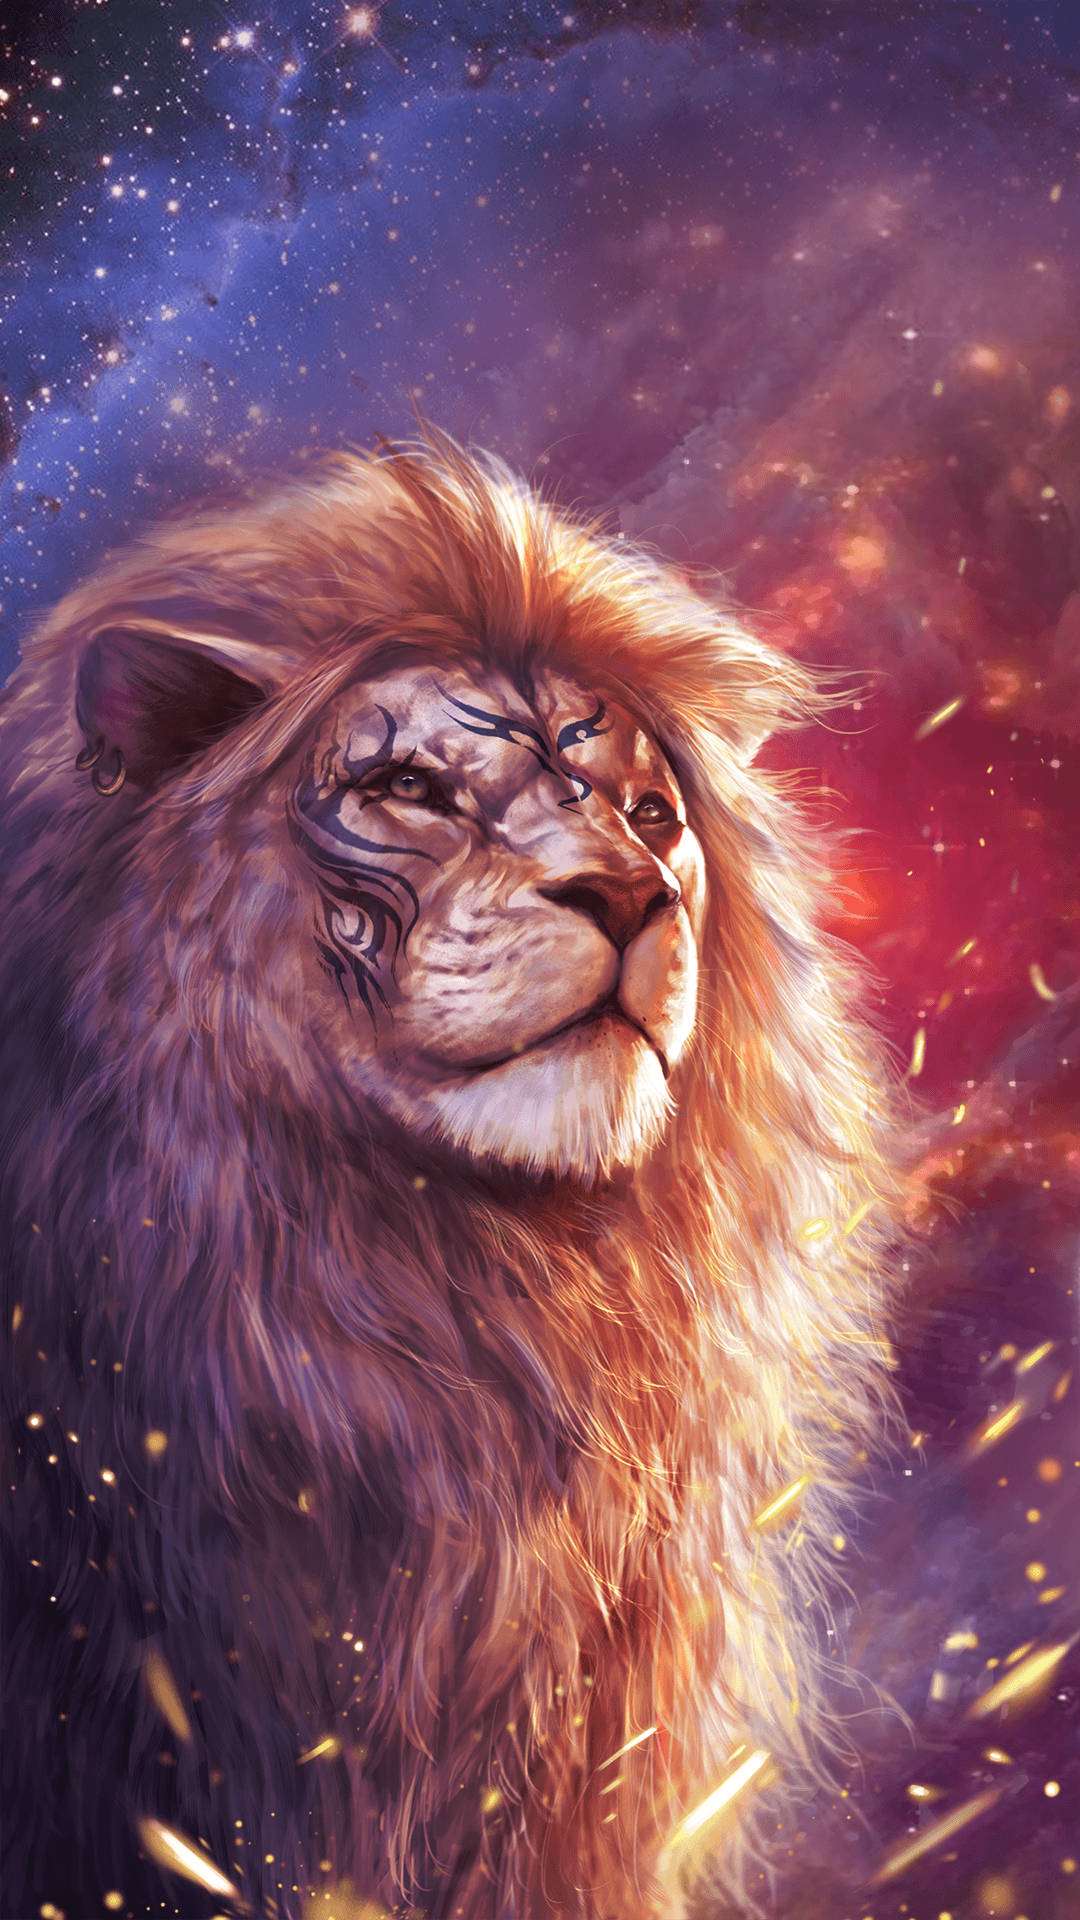 Aesthetic Face Tattoo Lion iPhone Wallpaper